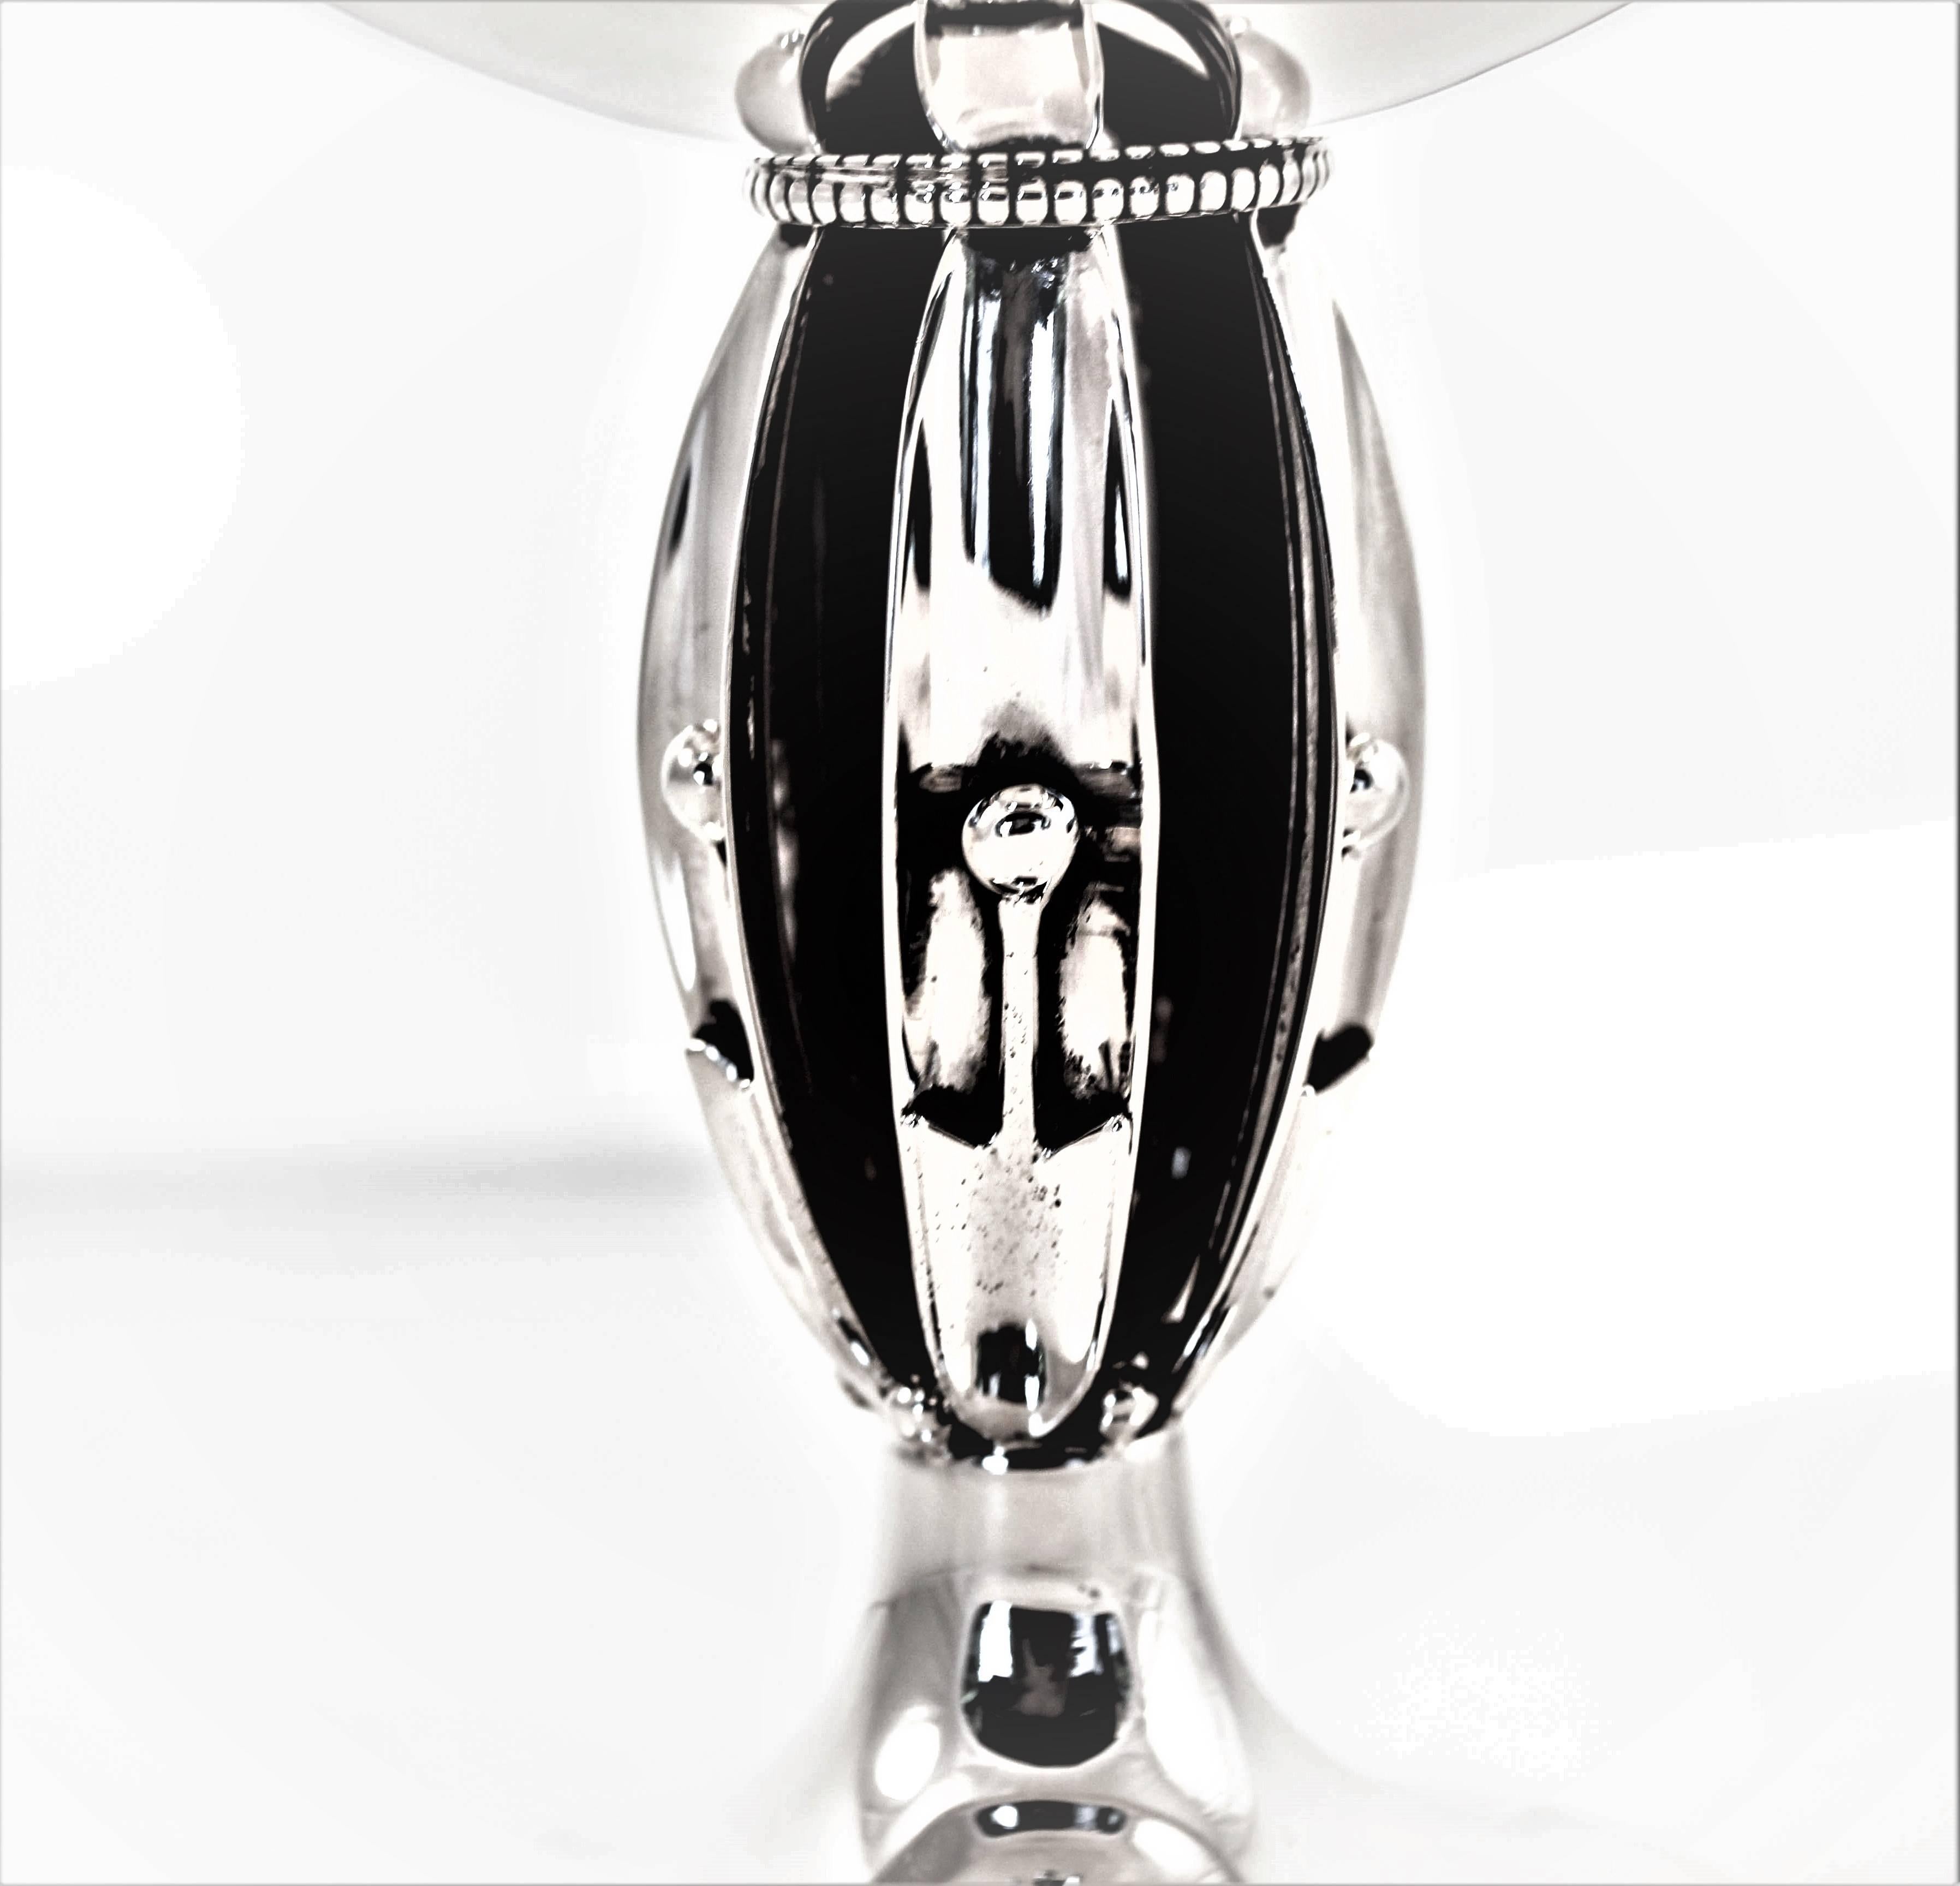 This compote has a modern, “clean” look with an interesting modernism design in the body. Five strips of silver connect the base with the top. The center is hollow. In the middle of each strip a ball is seen, in addition there is a ball in between